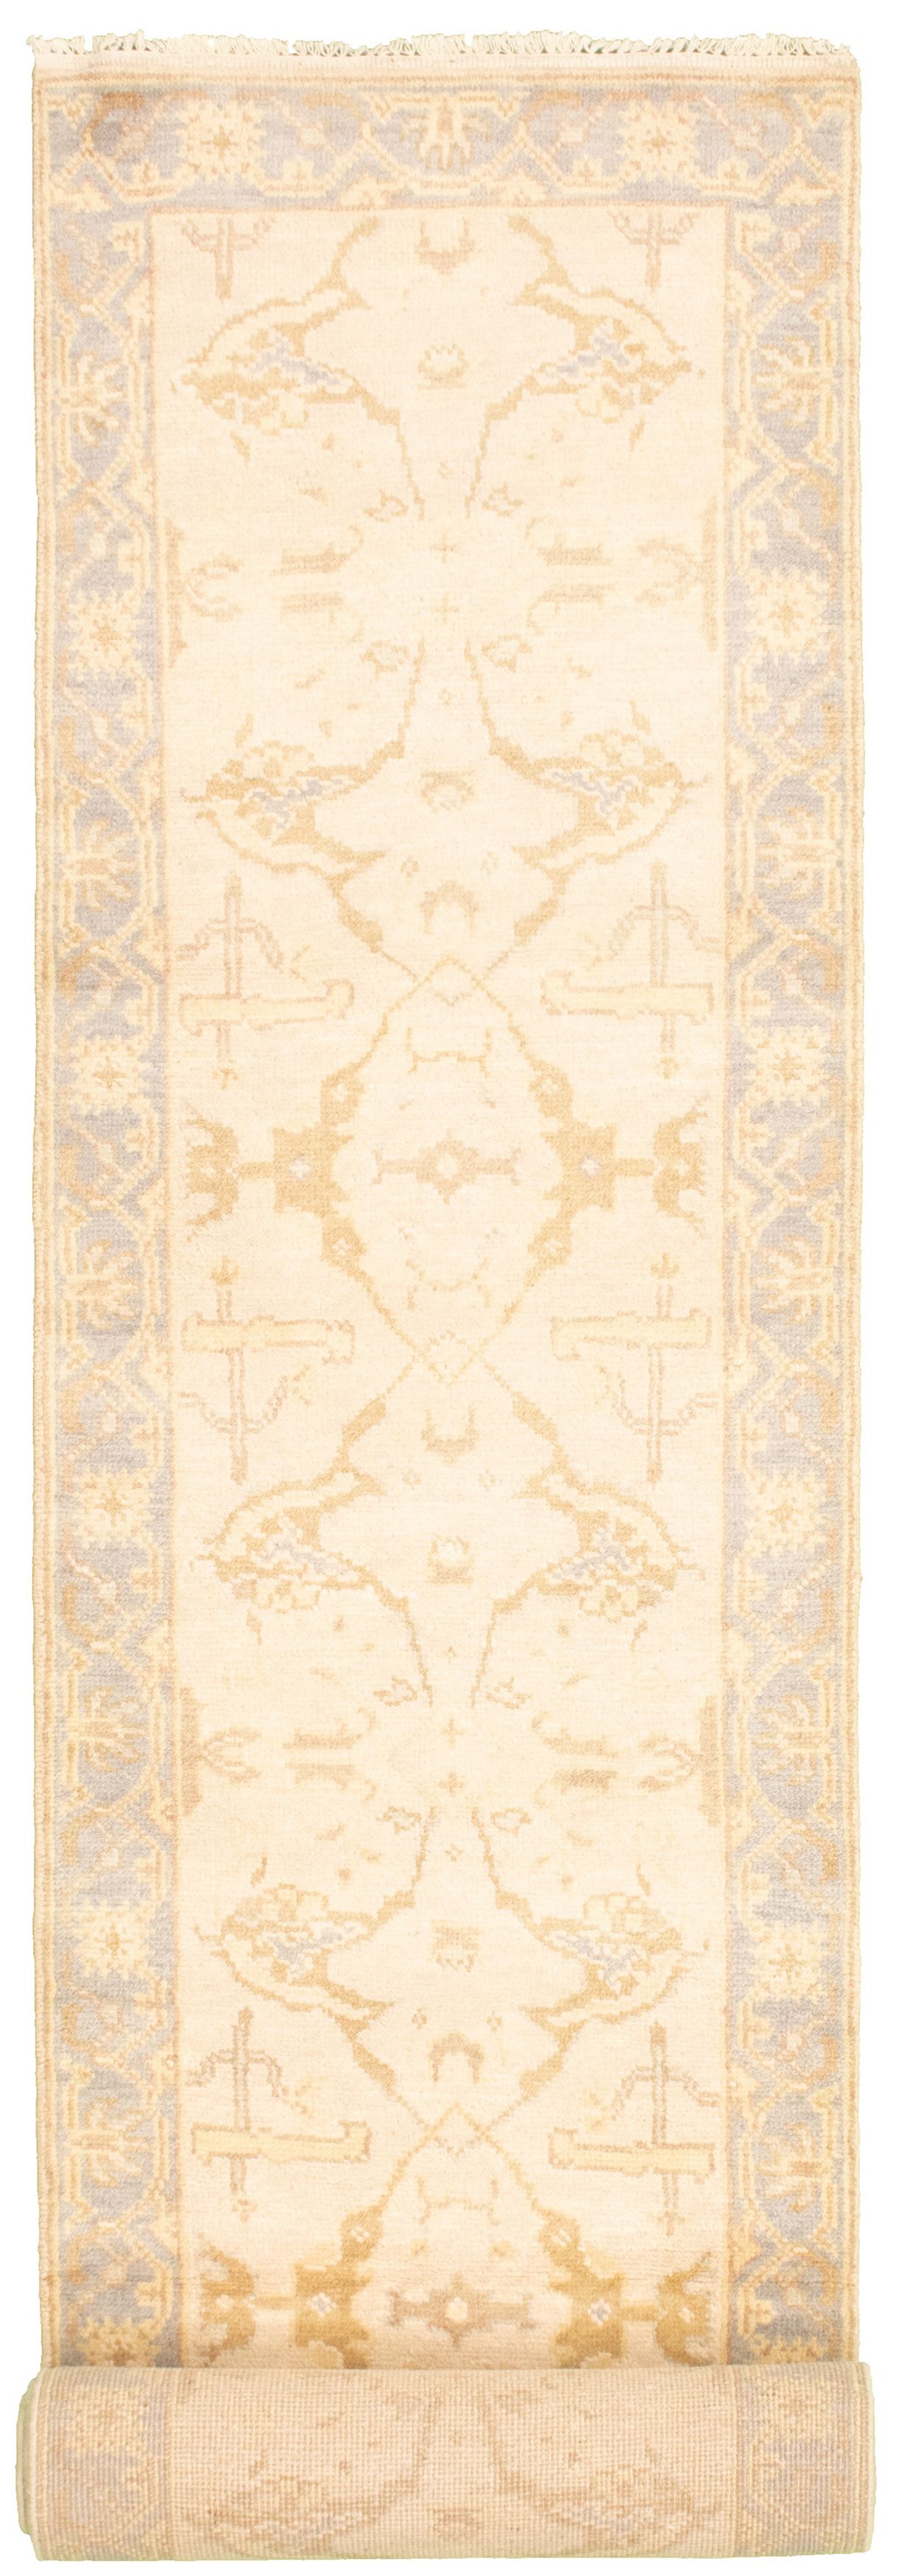 Hand-knotted Royal Ushak Tan Wool Rug 2'7" x 15'8" Size: 2'7" x 15'8"  